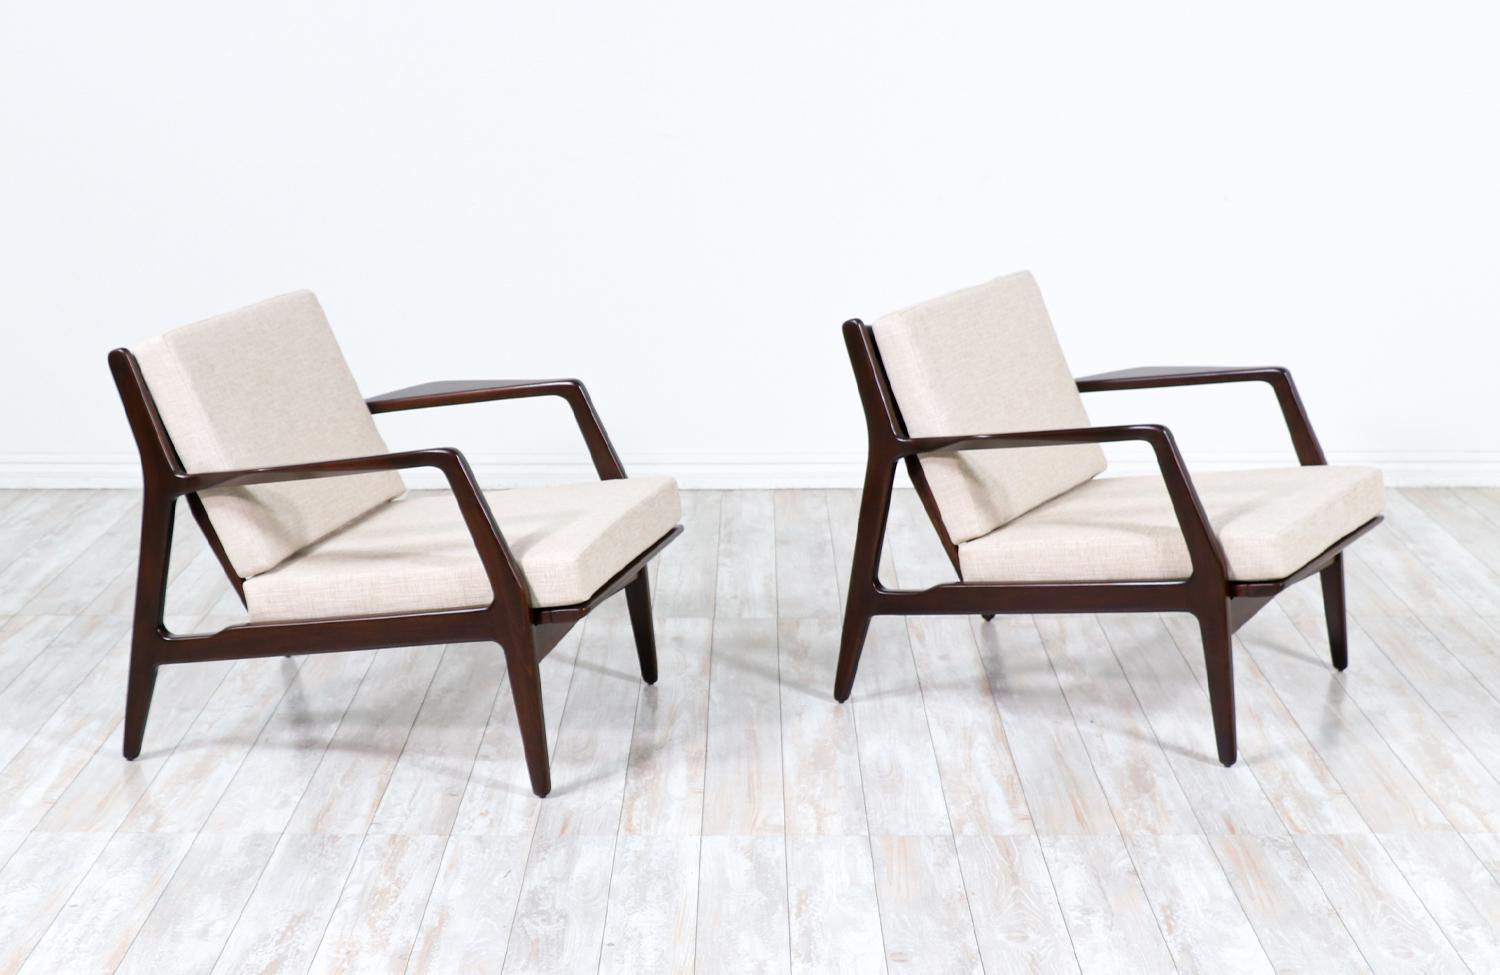 Pair of stylish lounge chair designed by Ib Kofod-Larsen for Selig in Denmark circa 1960s. These sleeks and ergonomic lounge chairs features a sturdy walnut-stained beech-wood frame with angled legs and a sculptural slatted back that is held in